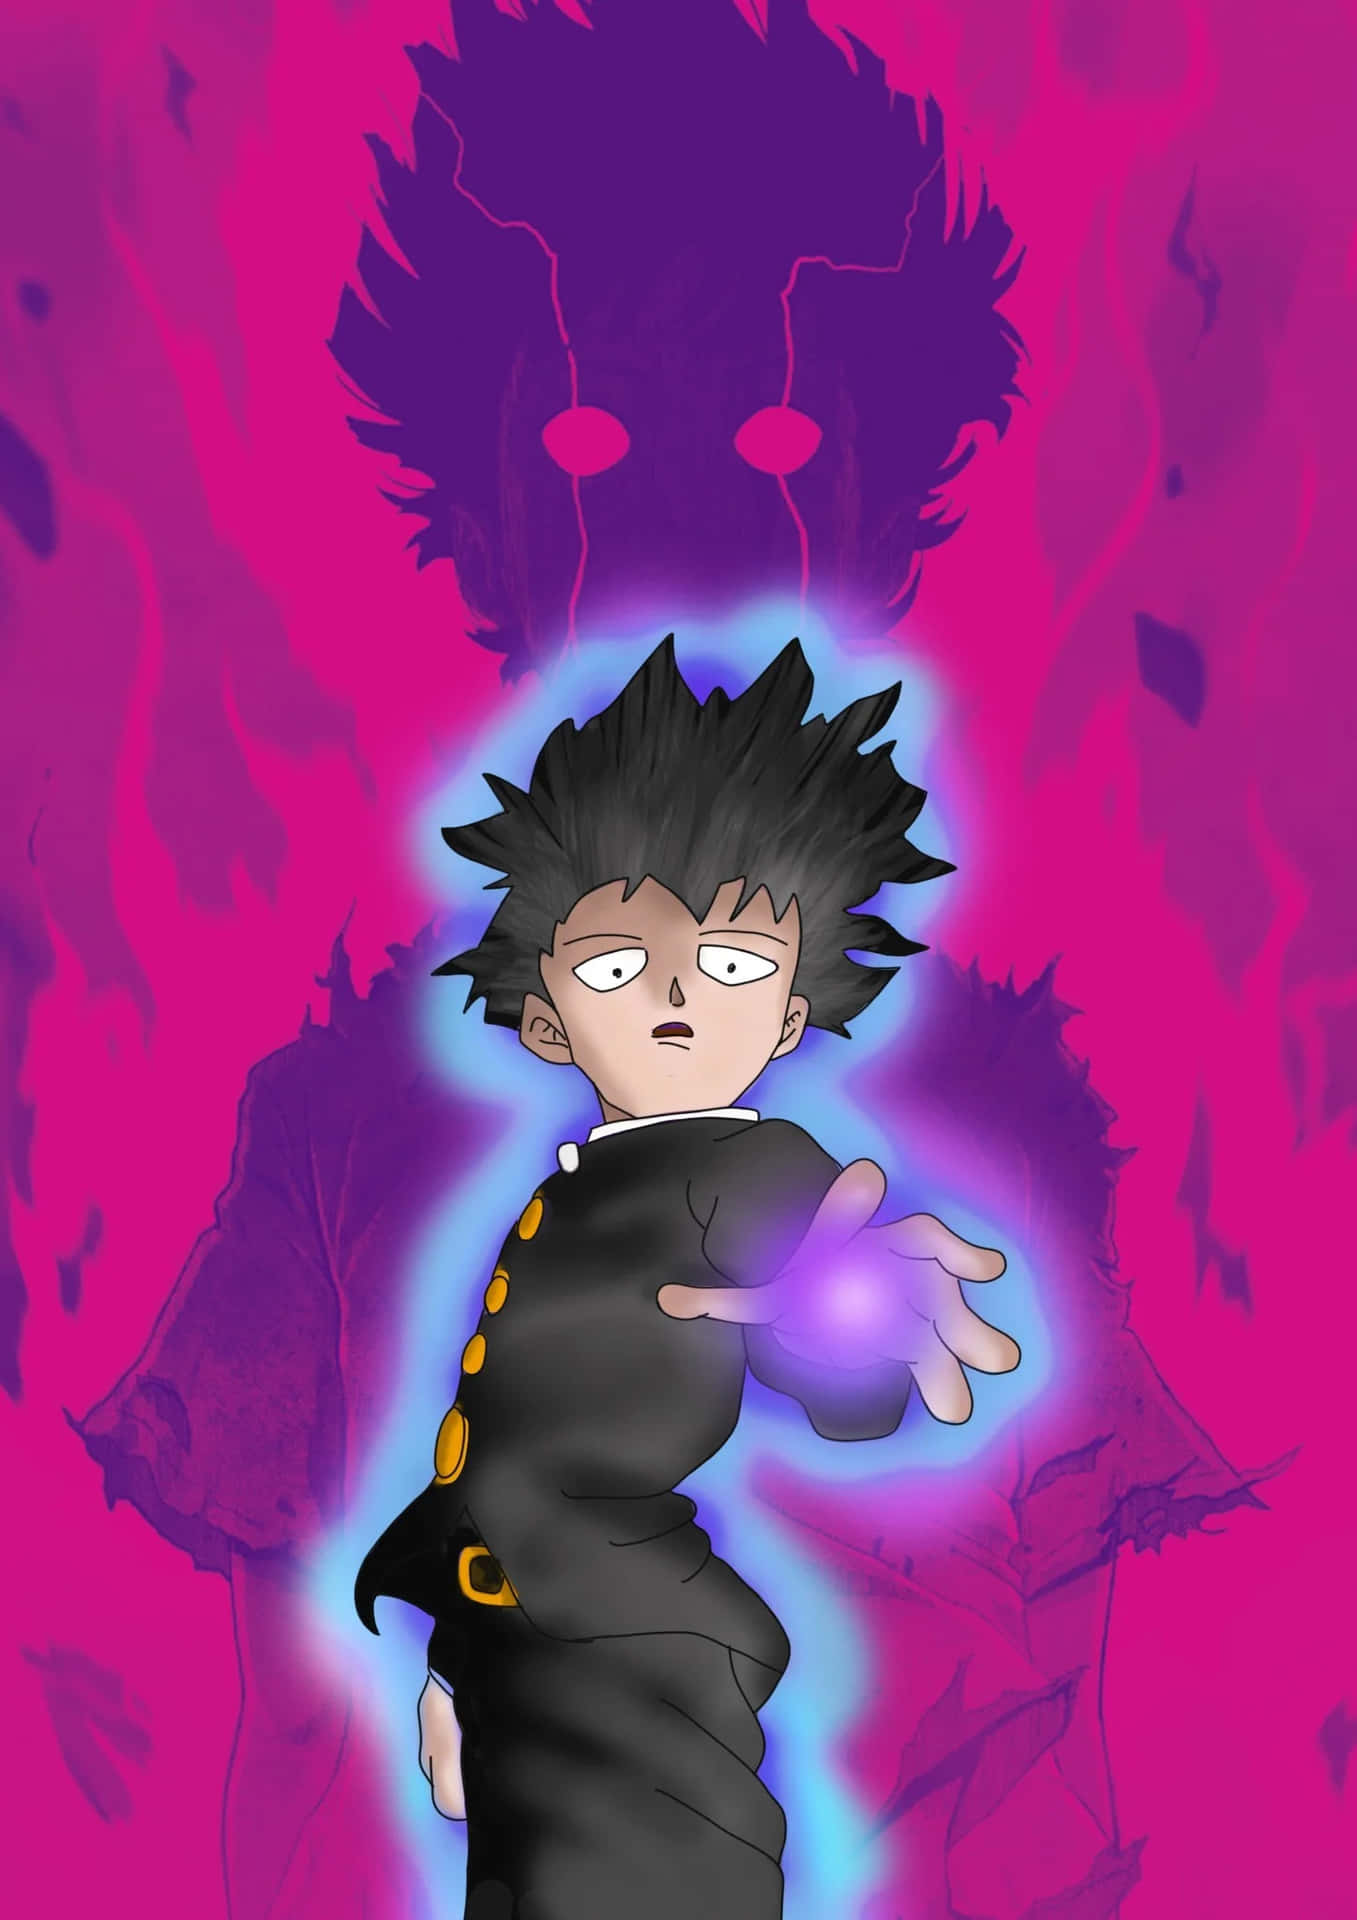 Shigeo Kageyama unleashing his psychic abilities in full force Wallpaper